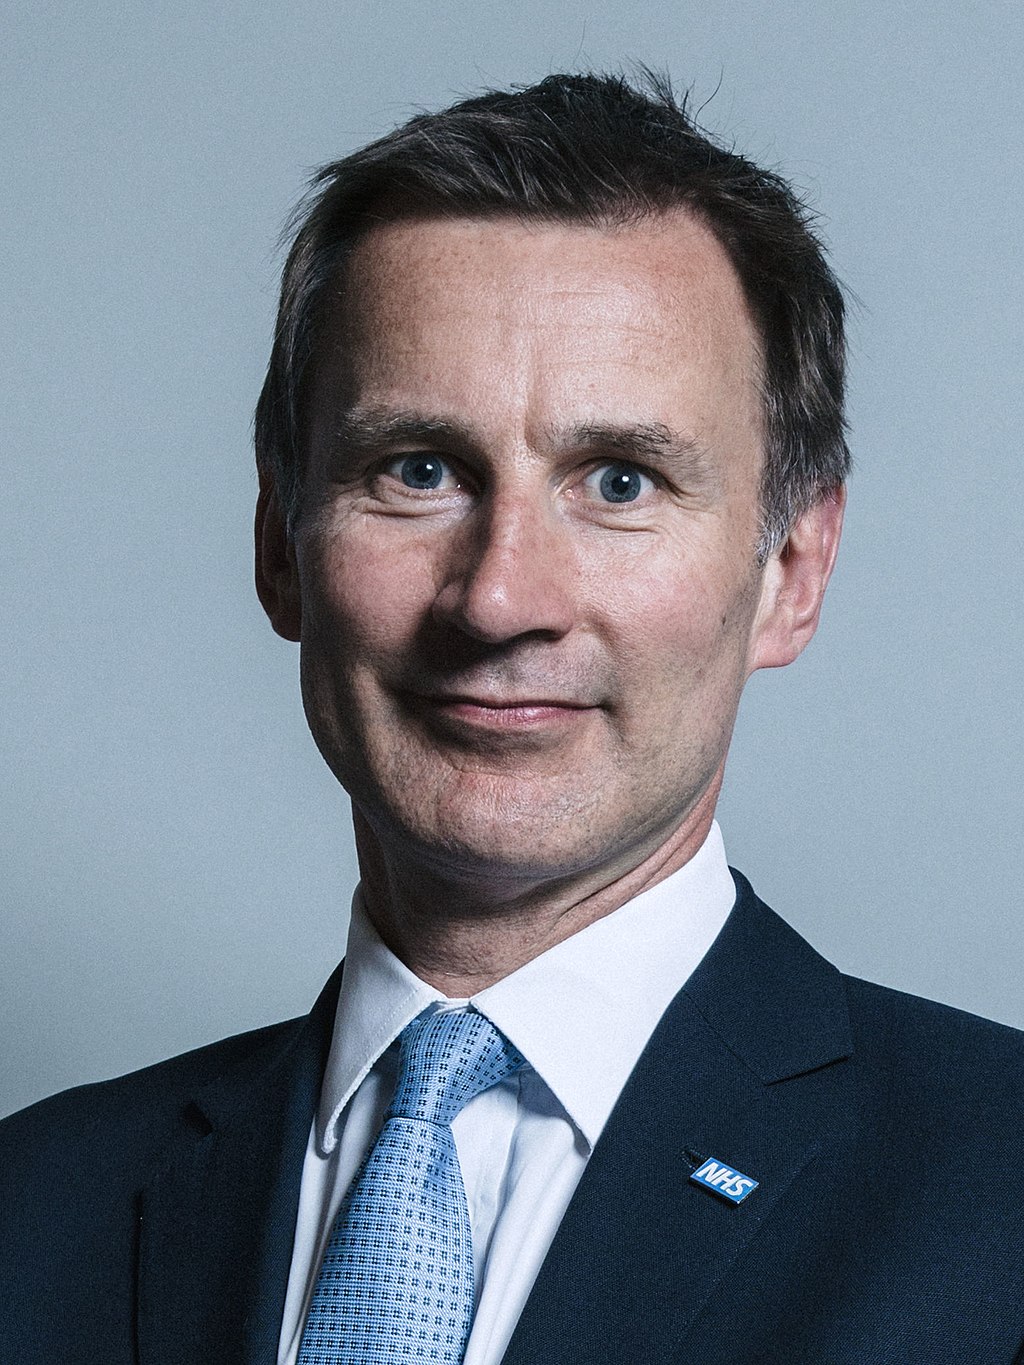 Image of Jeremy Hunt looking at the camera. He is wearing a white shirt, with a light blue tie and a dark colour blazer